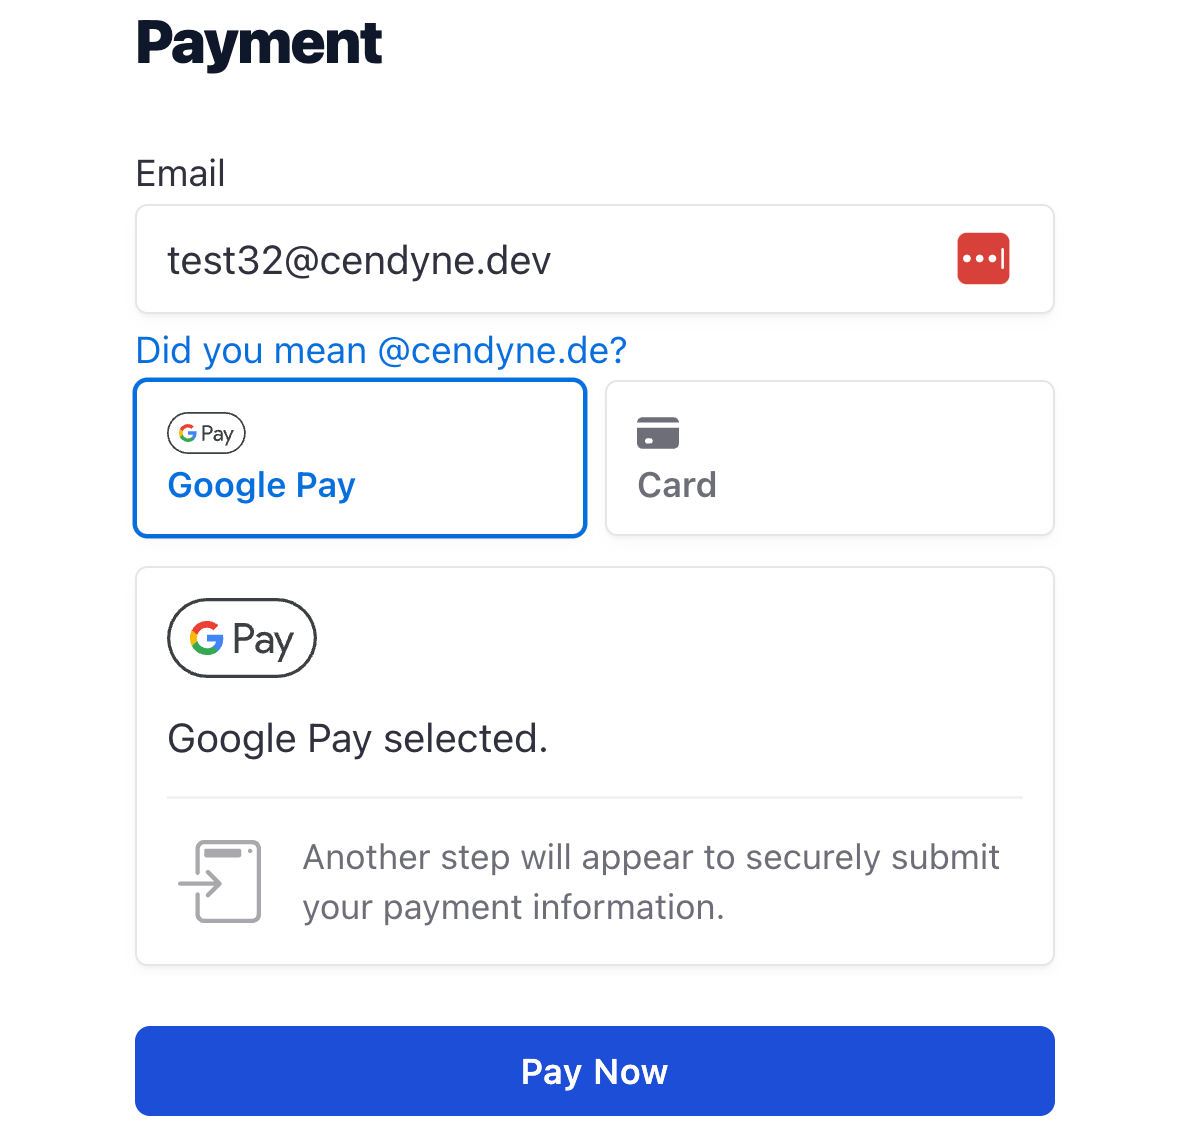 Google Pay is selected